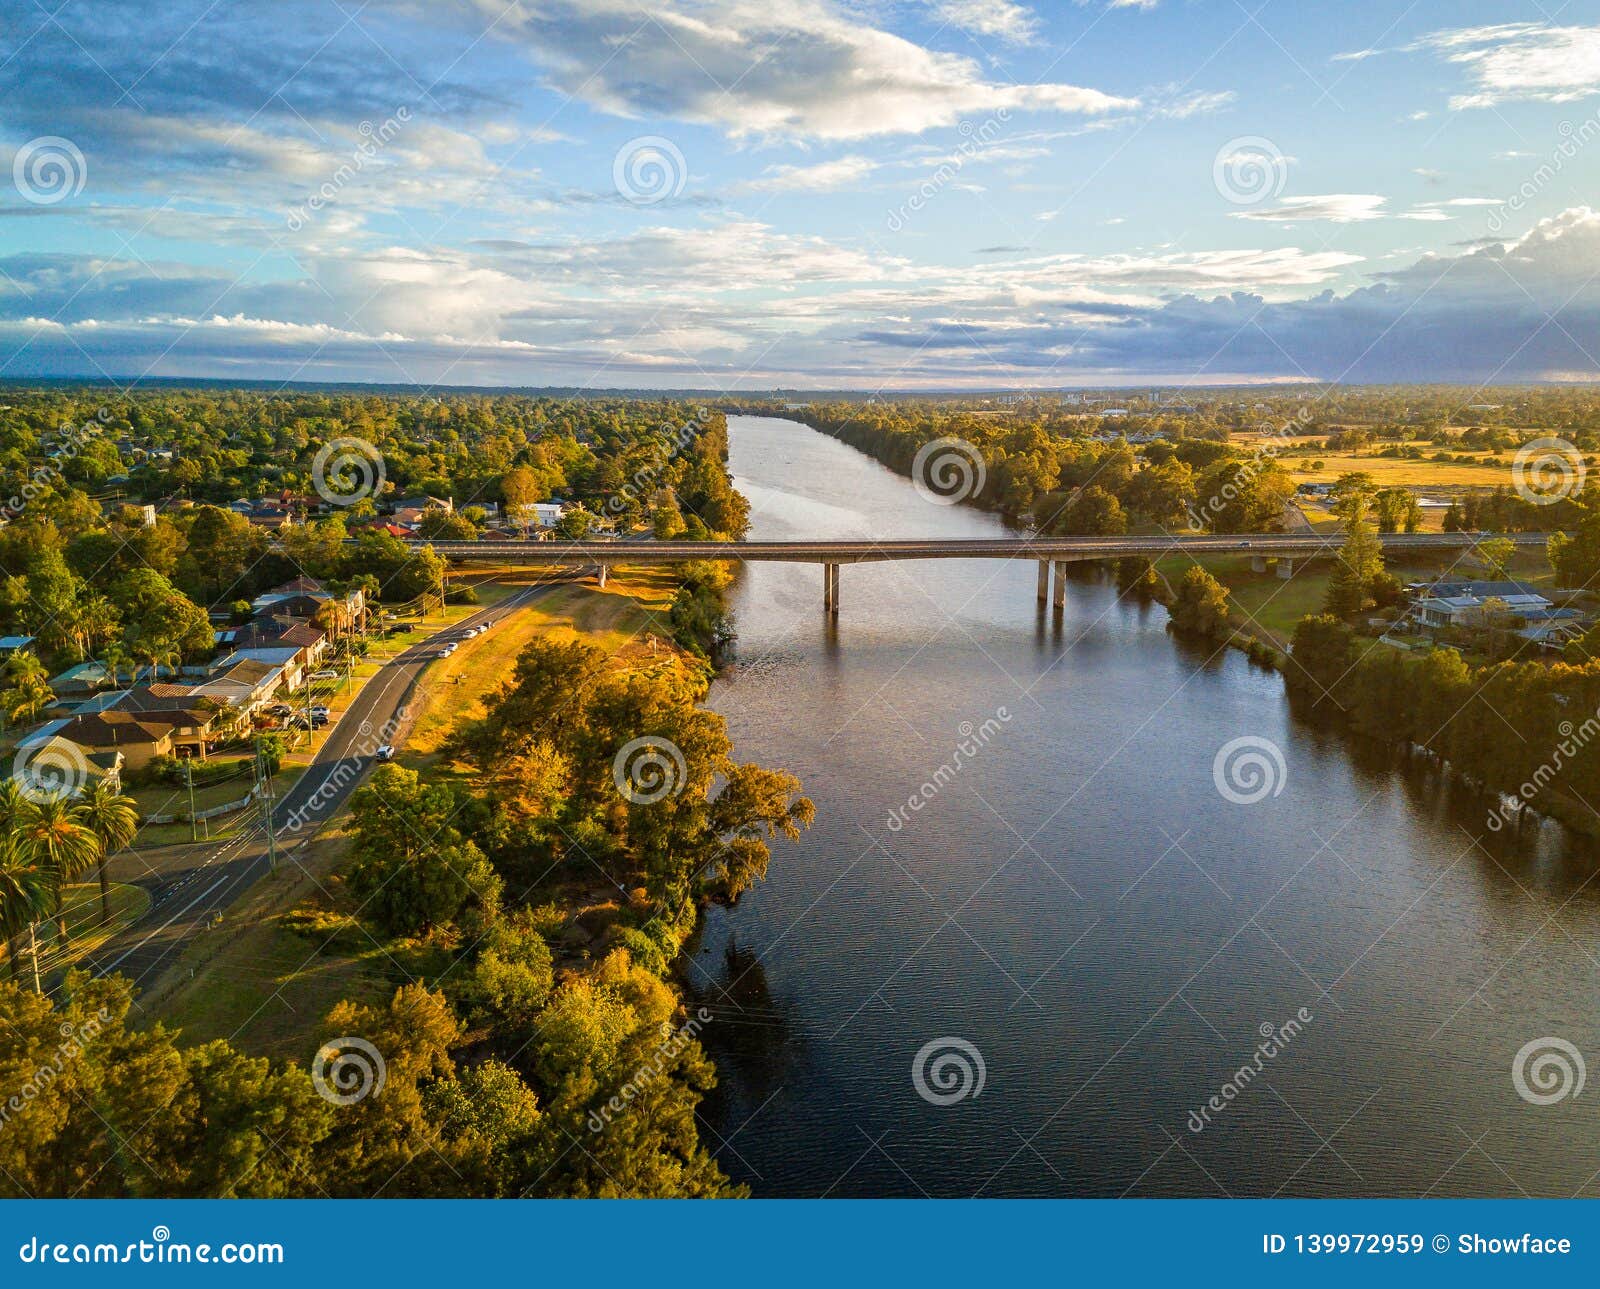 scenic views of the nepean river penrith